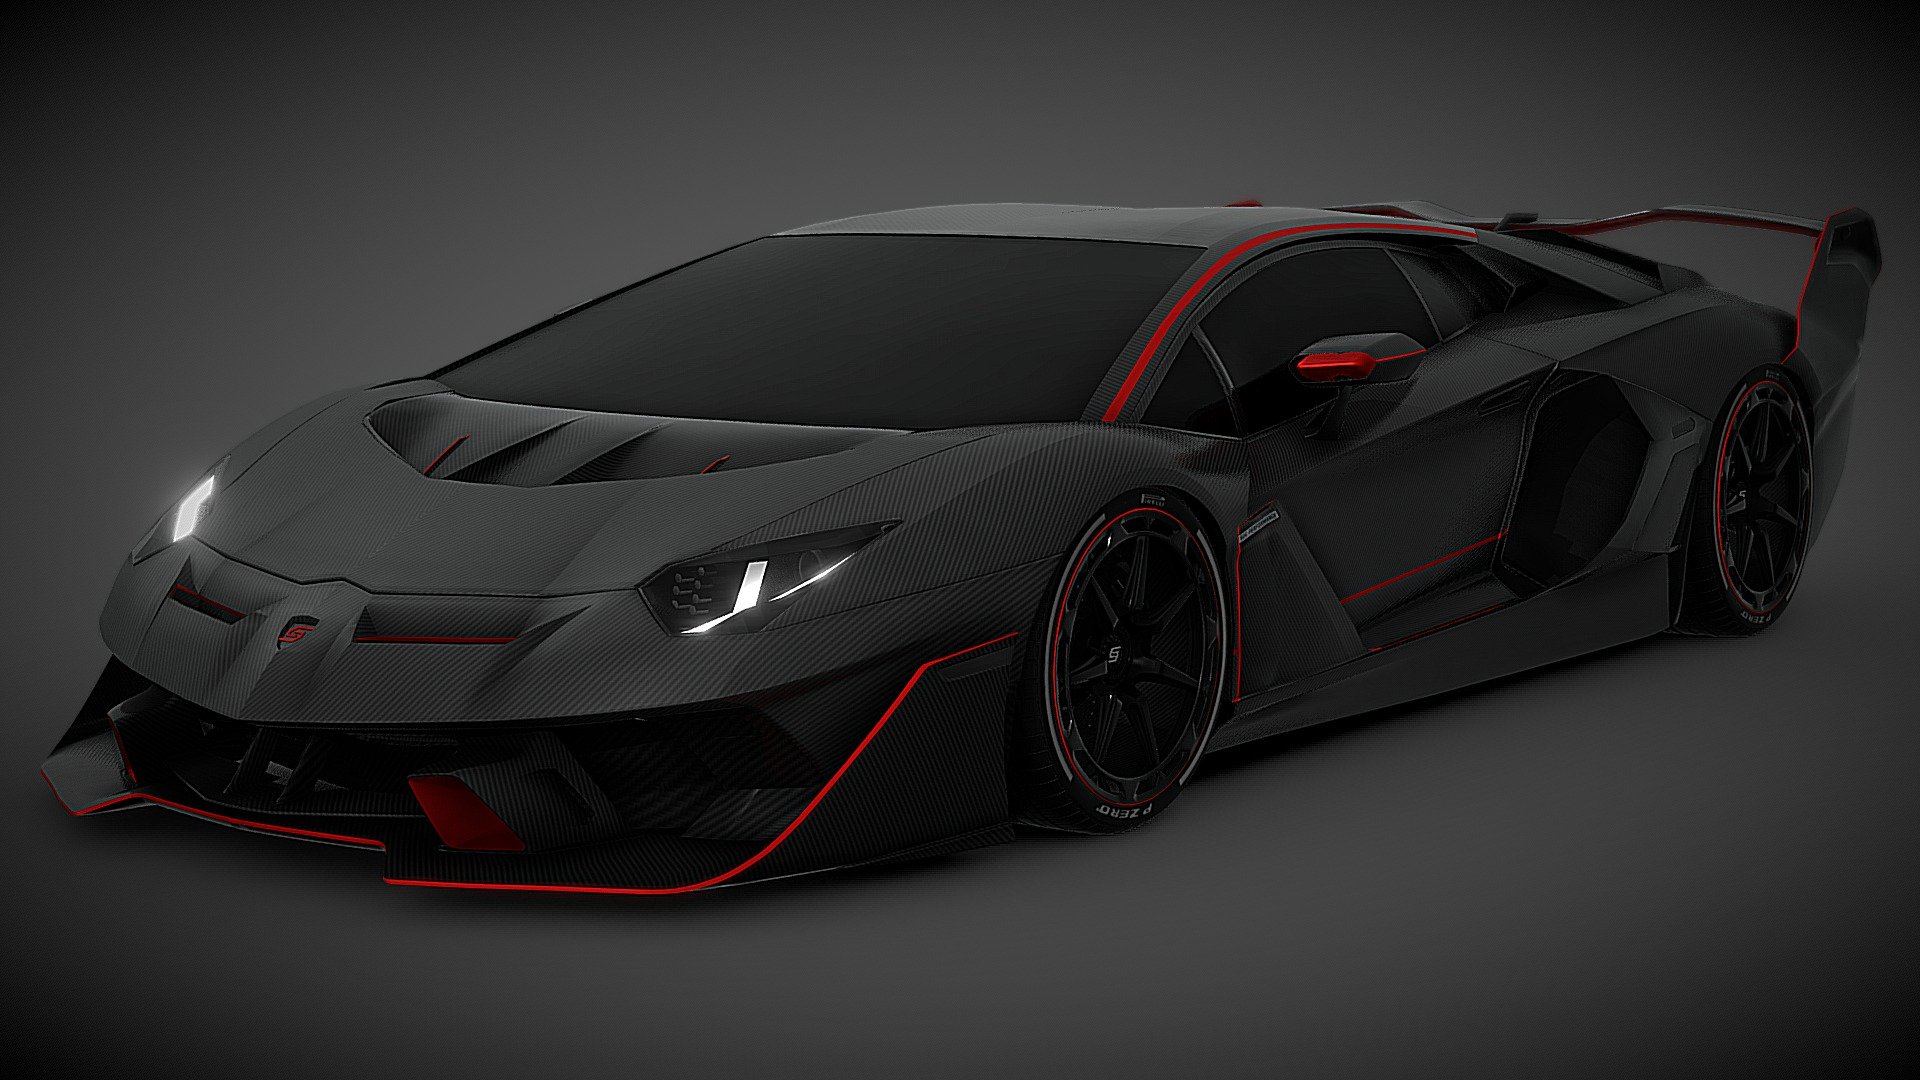 The Aventador SVJ SC20 EDITION - 1 of 1 - By SDC PERFORMANCE™️

Here is a new full carbon configuration of the Lamborghini SC20 EDTION, with a slight touch-up on some elements, I hope you like it!!

By SDC PERFORMANCE - Blender 3.6

This template has required a lot of work and it is offered to you for free by SDC. Thank you for supporting us. You can subscribe, like, and leave a comment! Thank you !!!

For more models click here (everything is free !!) :

https://sketchfab.com/3Duae - Lamborghini Aventador SVJ - SC20 CARBON EDITION - Download Free 3D model by SDC PERFORMANCE™️ (@3Duae) 3d model